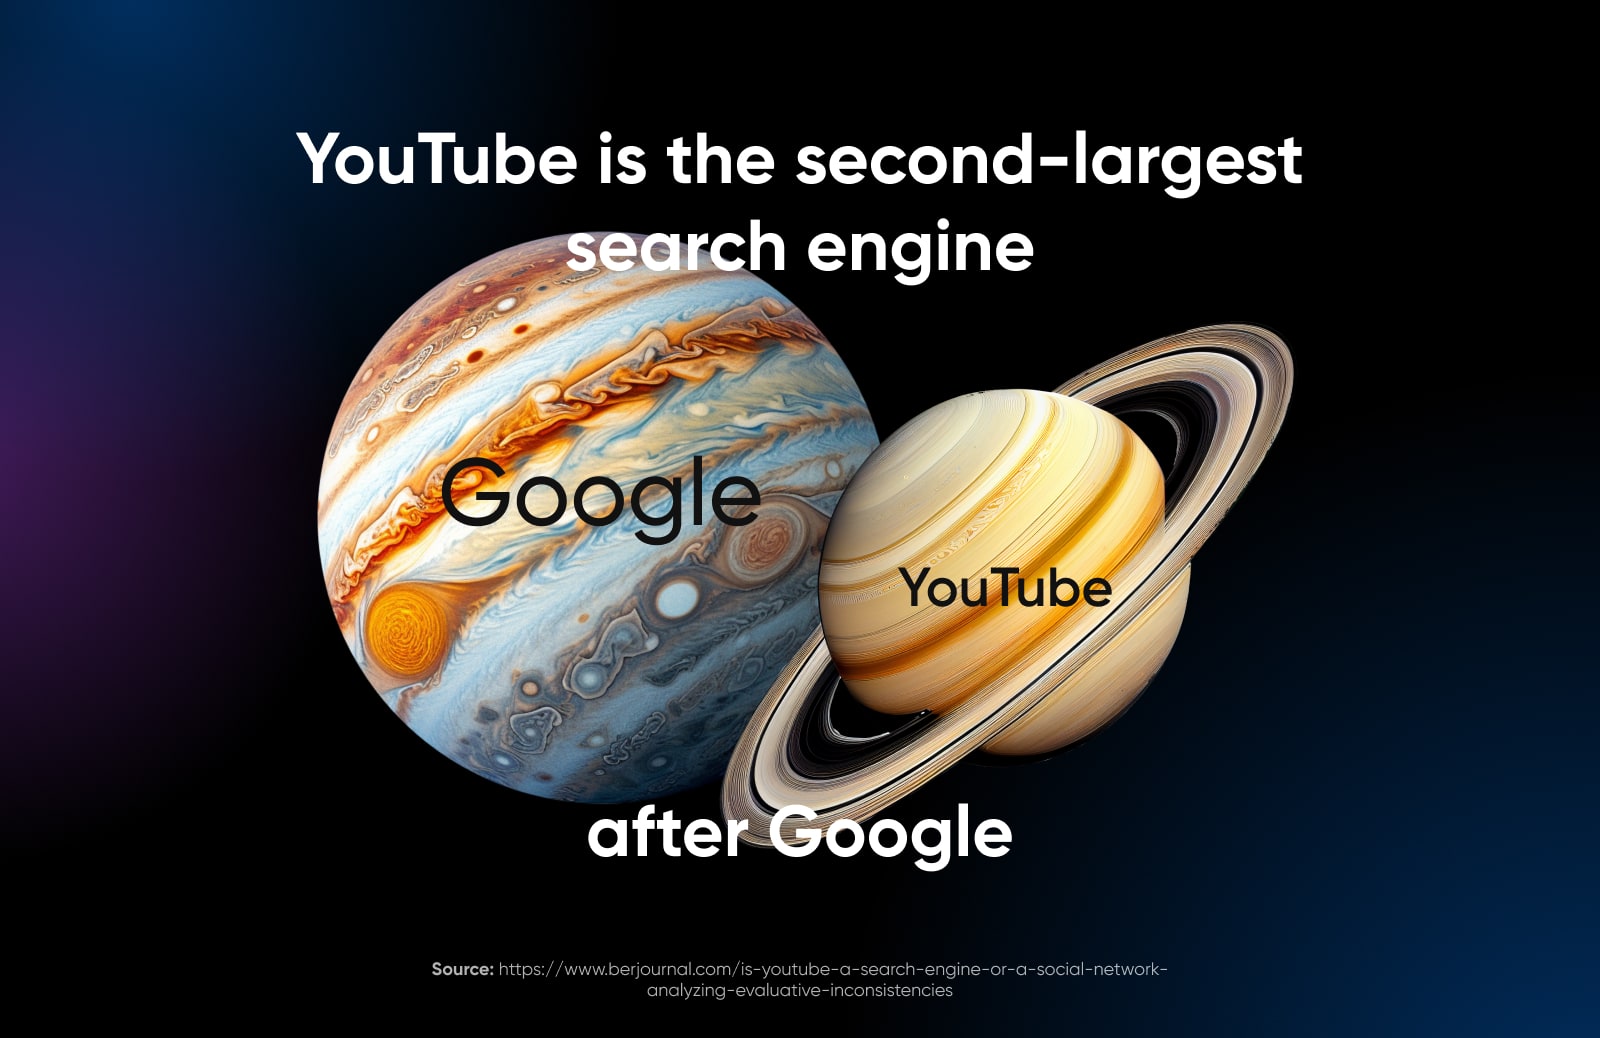 YouTube is the second largest search engine after google using a comparison of Jupiter (Google) and Saturn YouTube) 